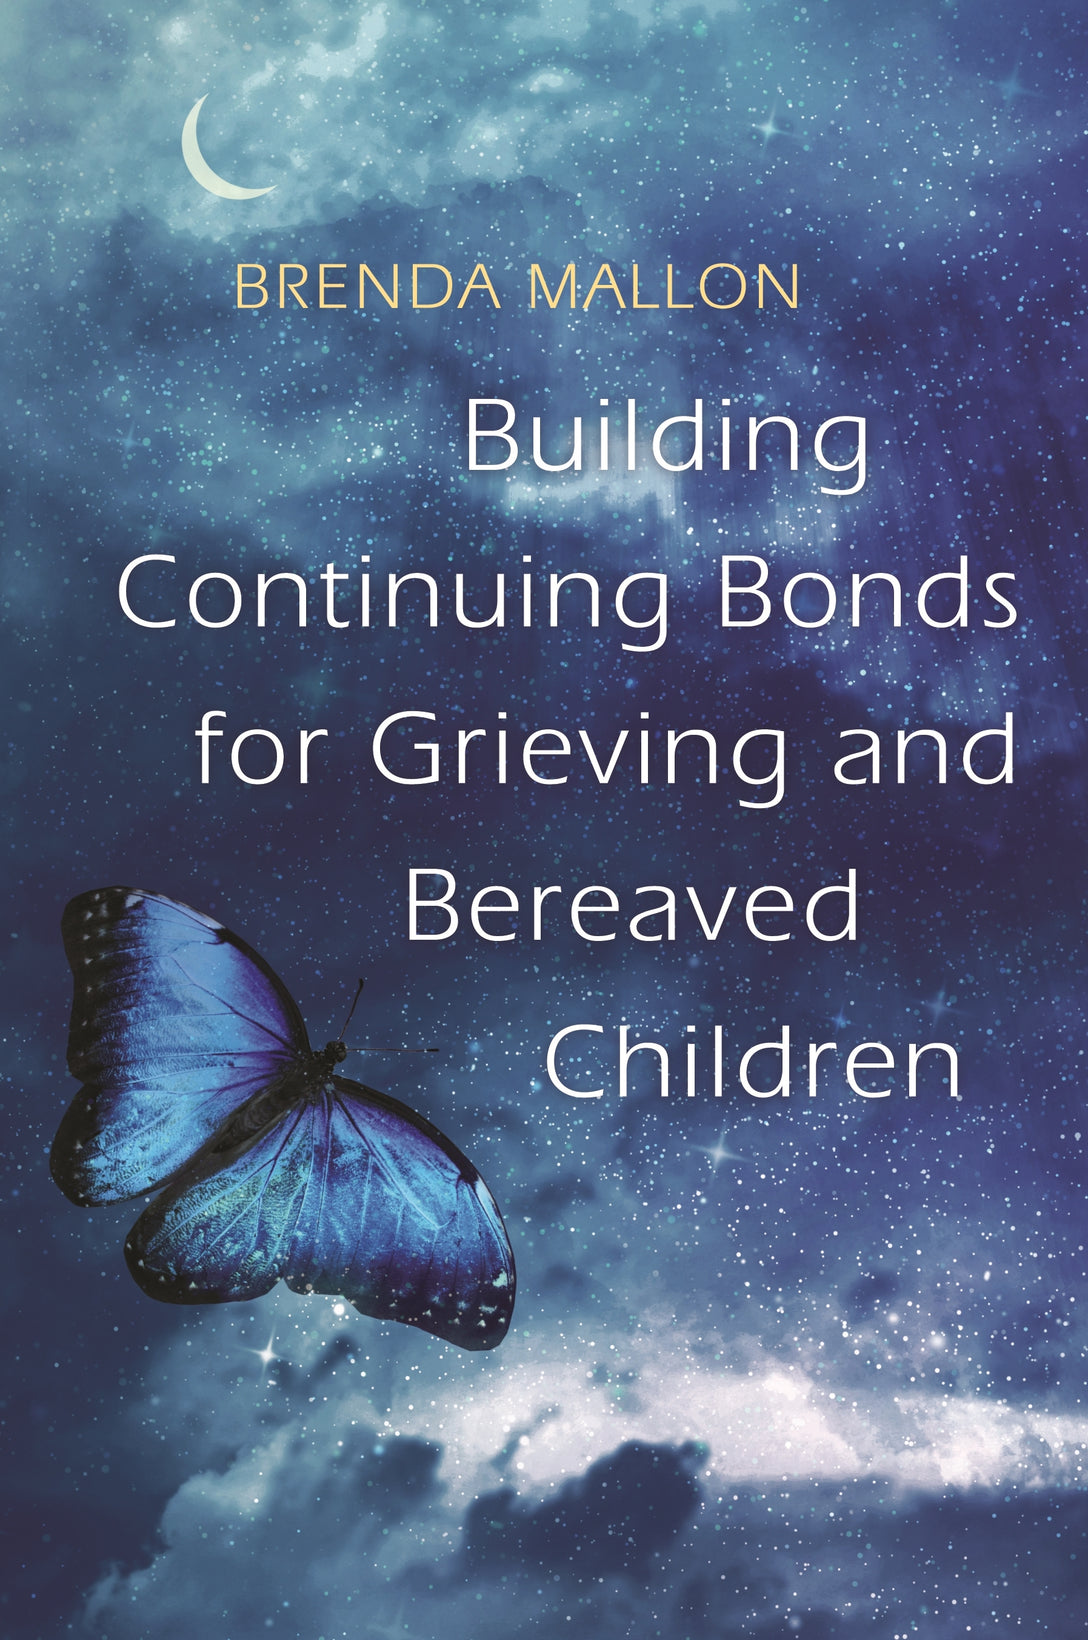 Building Continuing Bonds for Grieving and Bereaved Children by Brenda Mallon